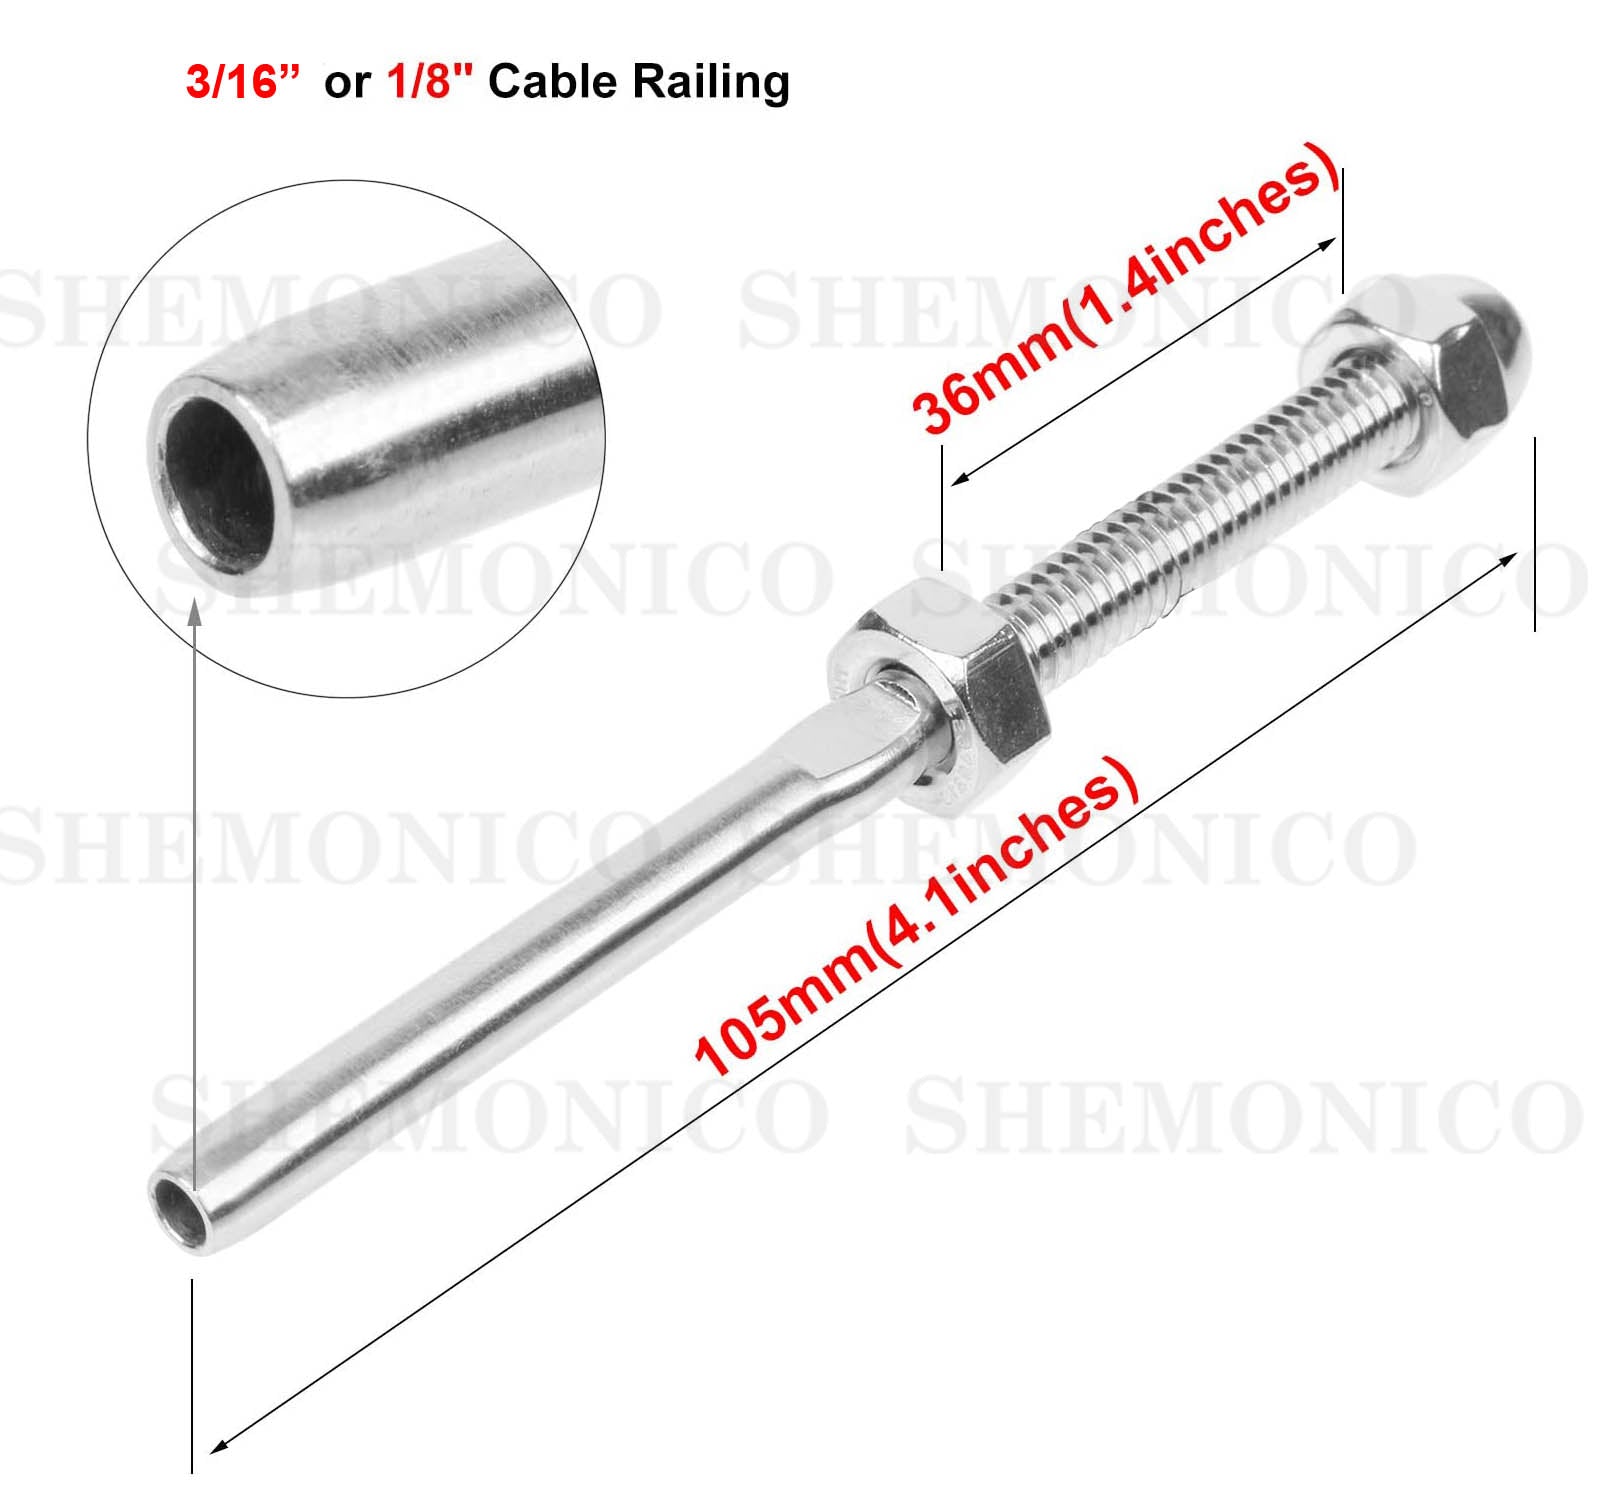 Hand Swage Tensioner Threaded Stud for 1/8" & 3/16" Cable T316 Marine Grade (C1036) - SHEMONICO